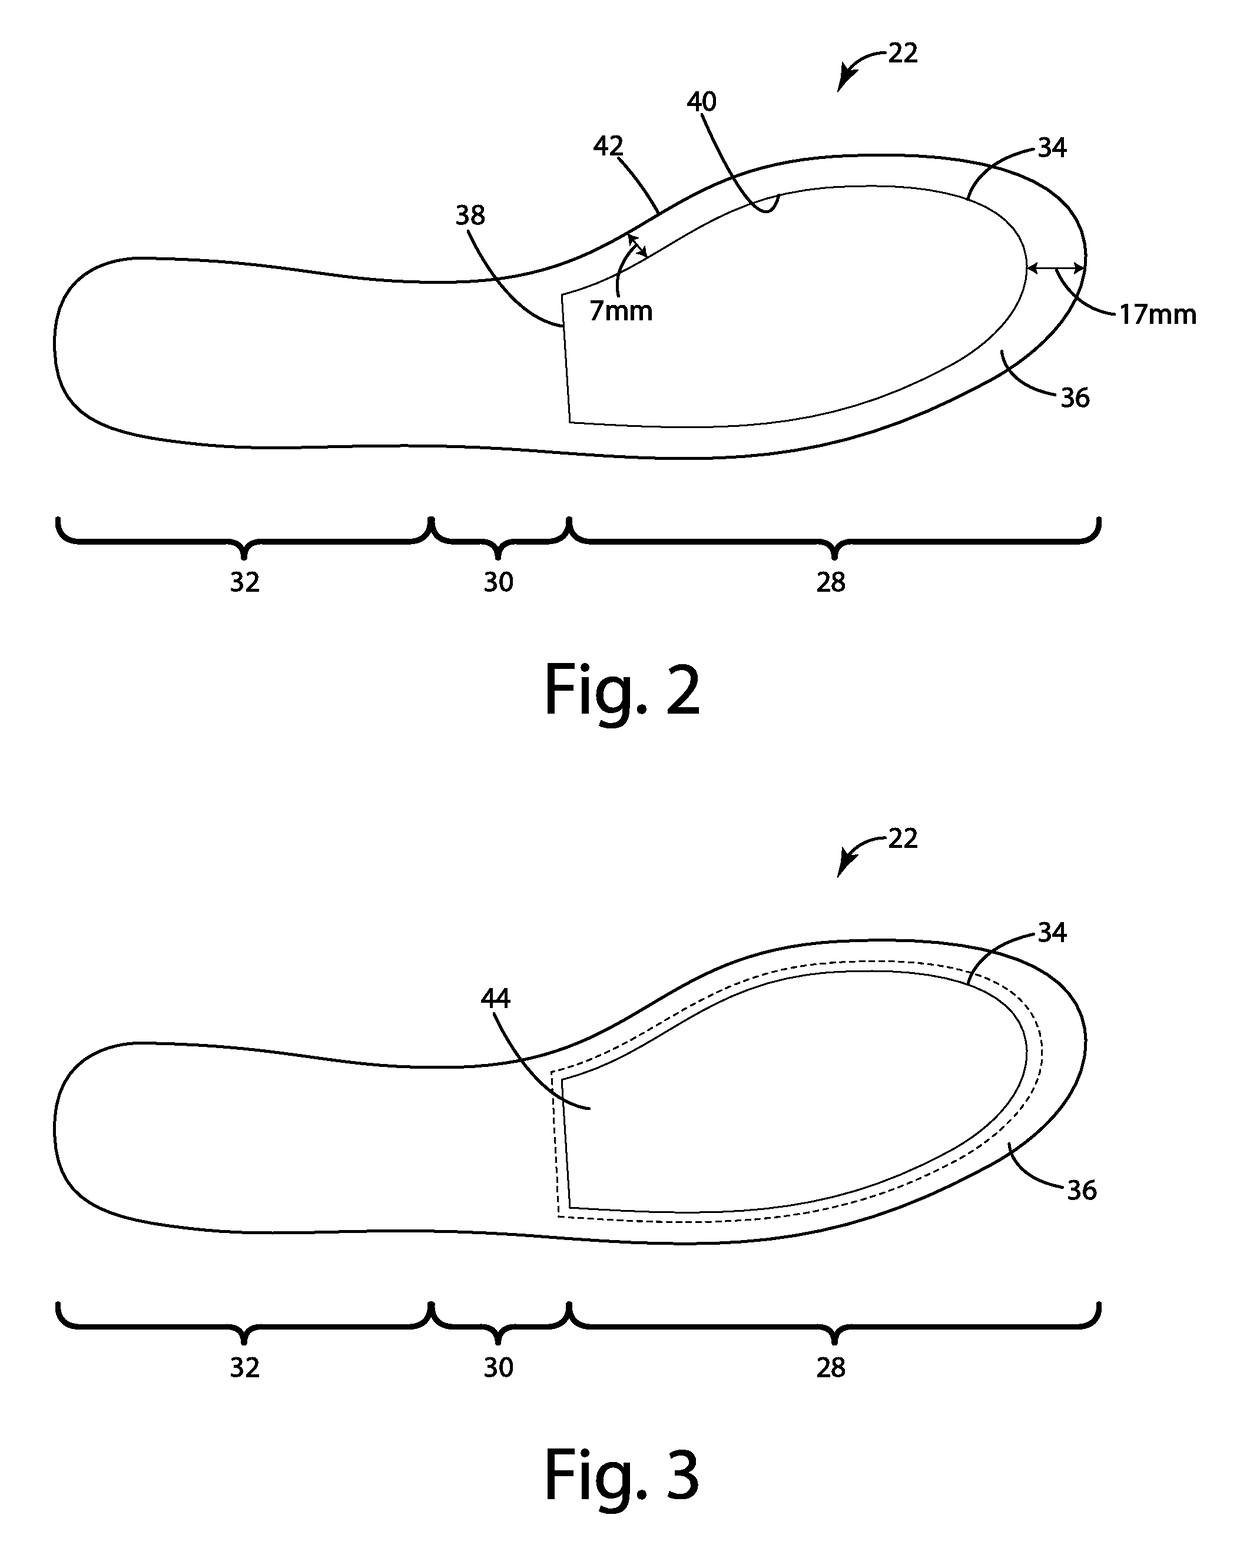 Flexible article of footwear and related method of manufacture